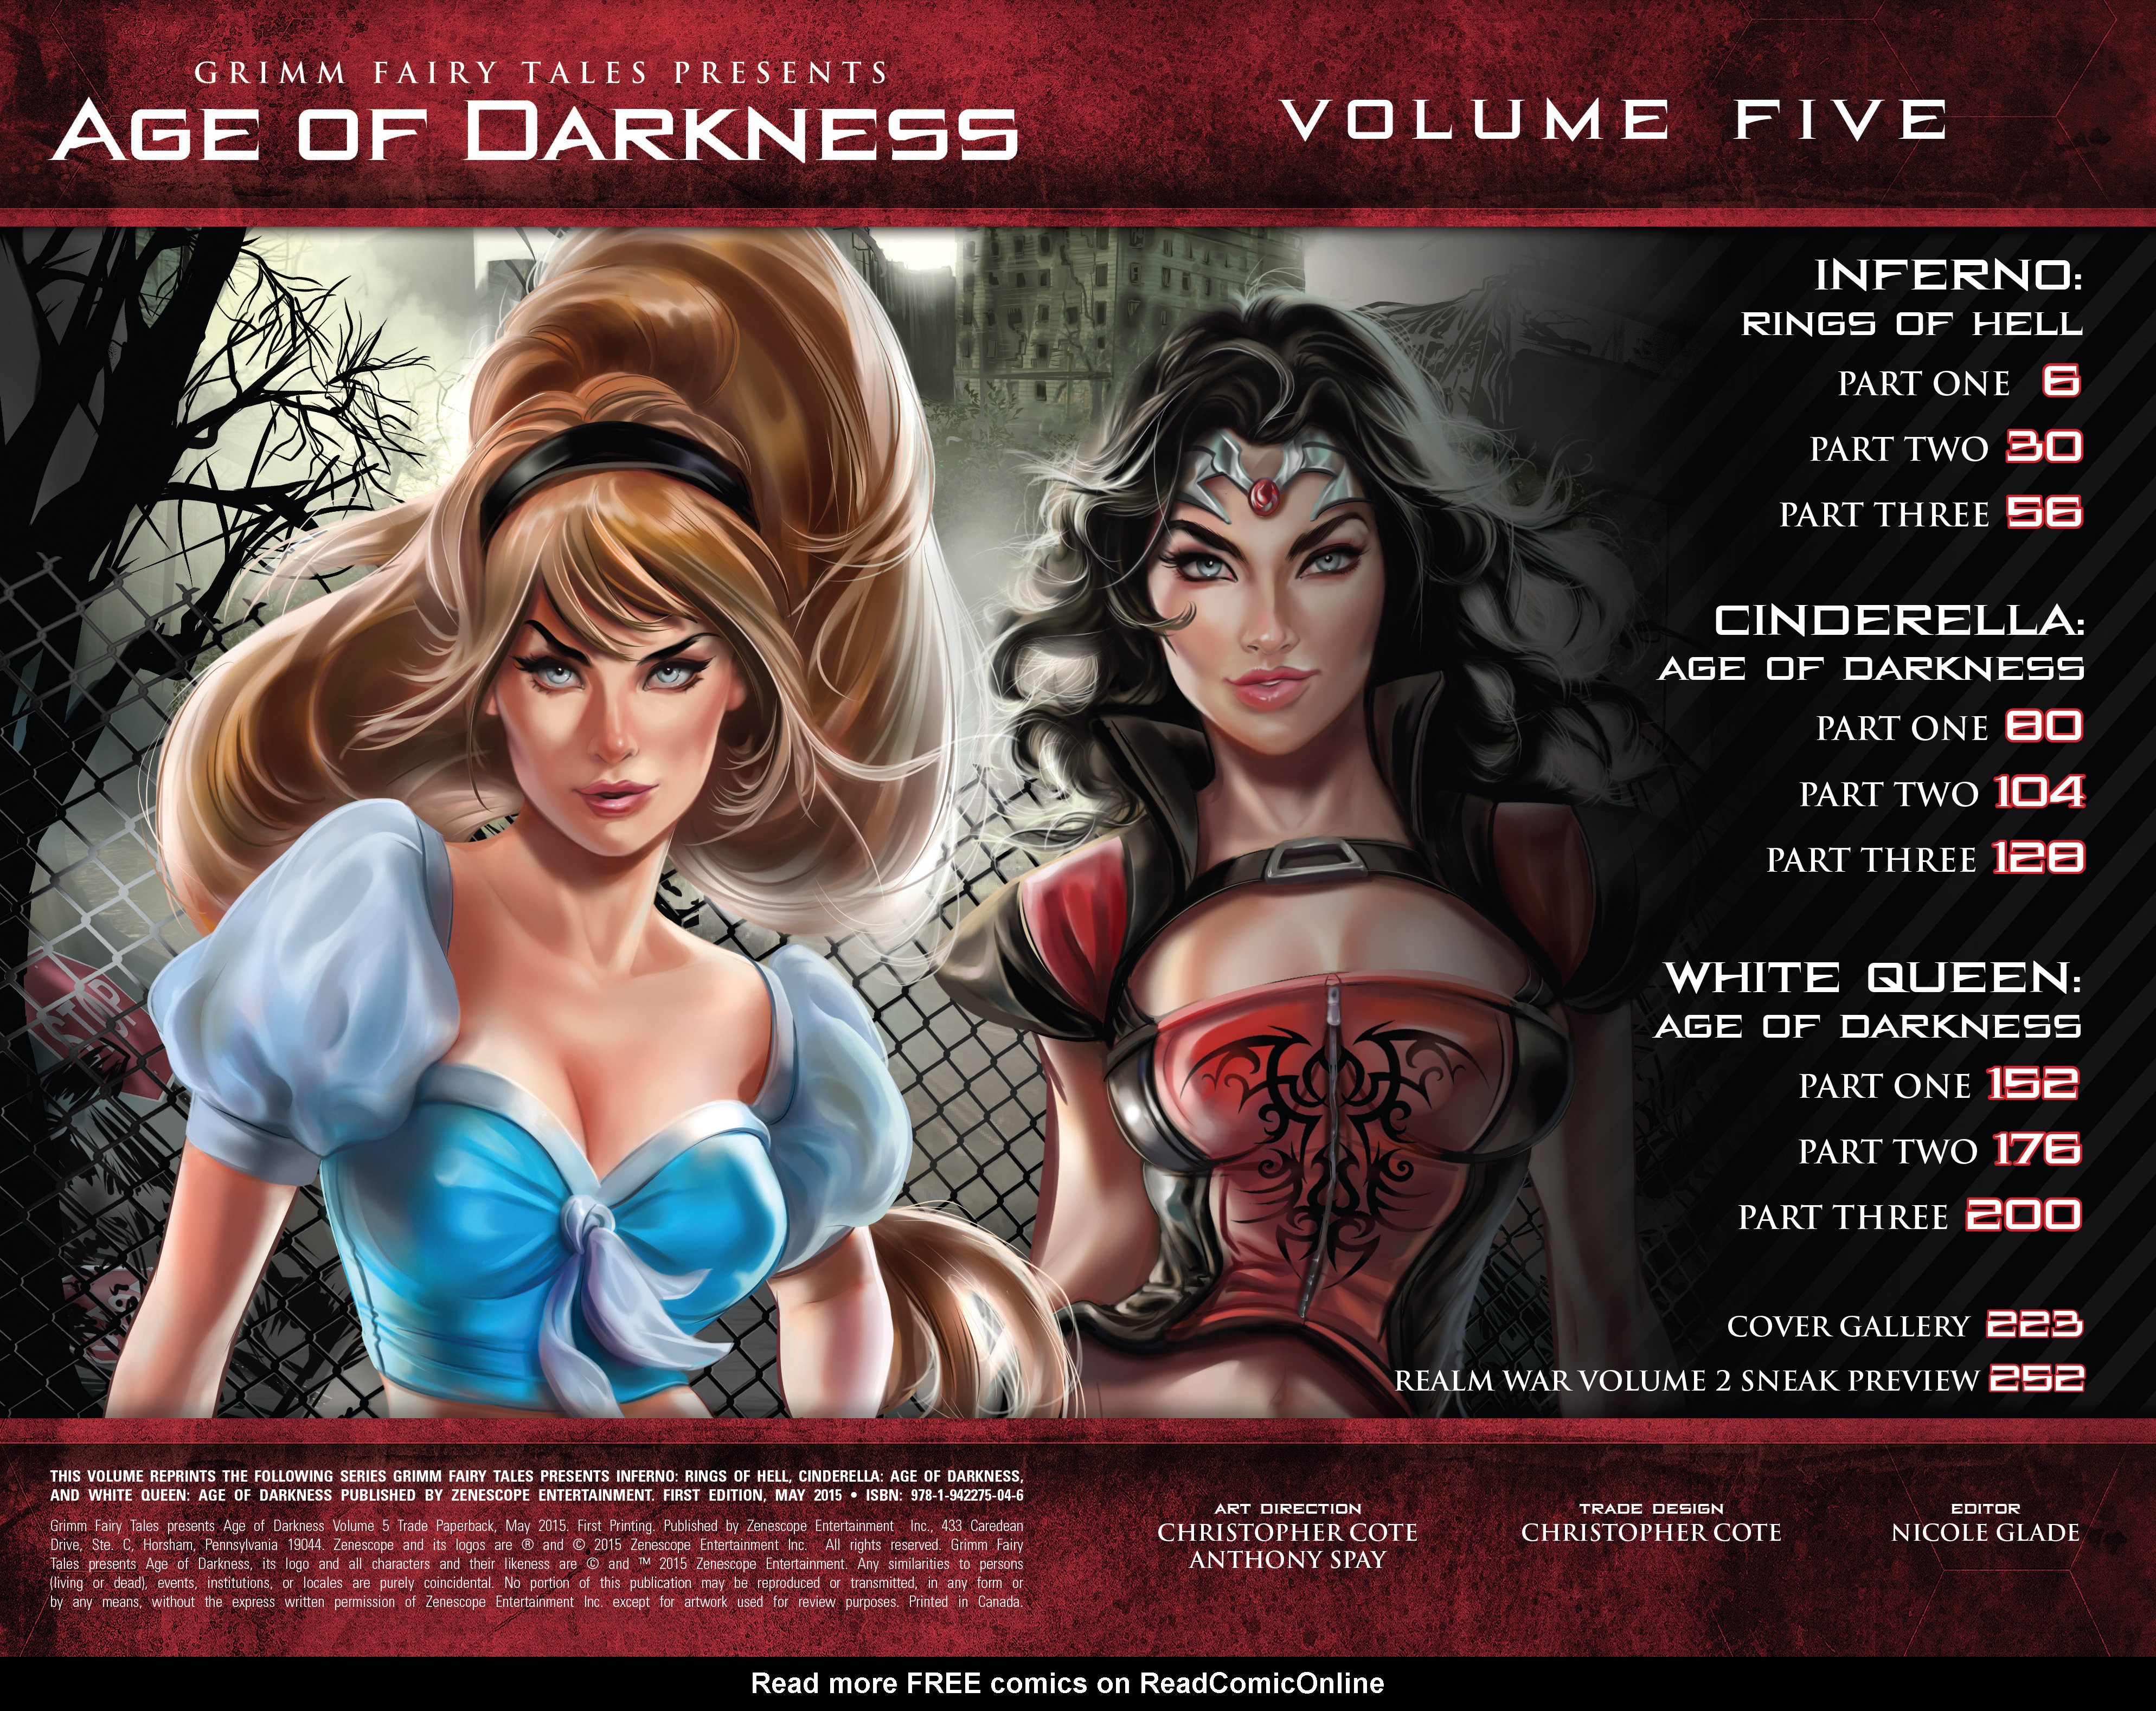 Read online Grimm Fairy Tales presents Age of Darkness comic -  Issue # Full - 3